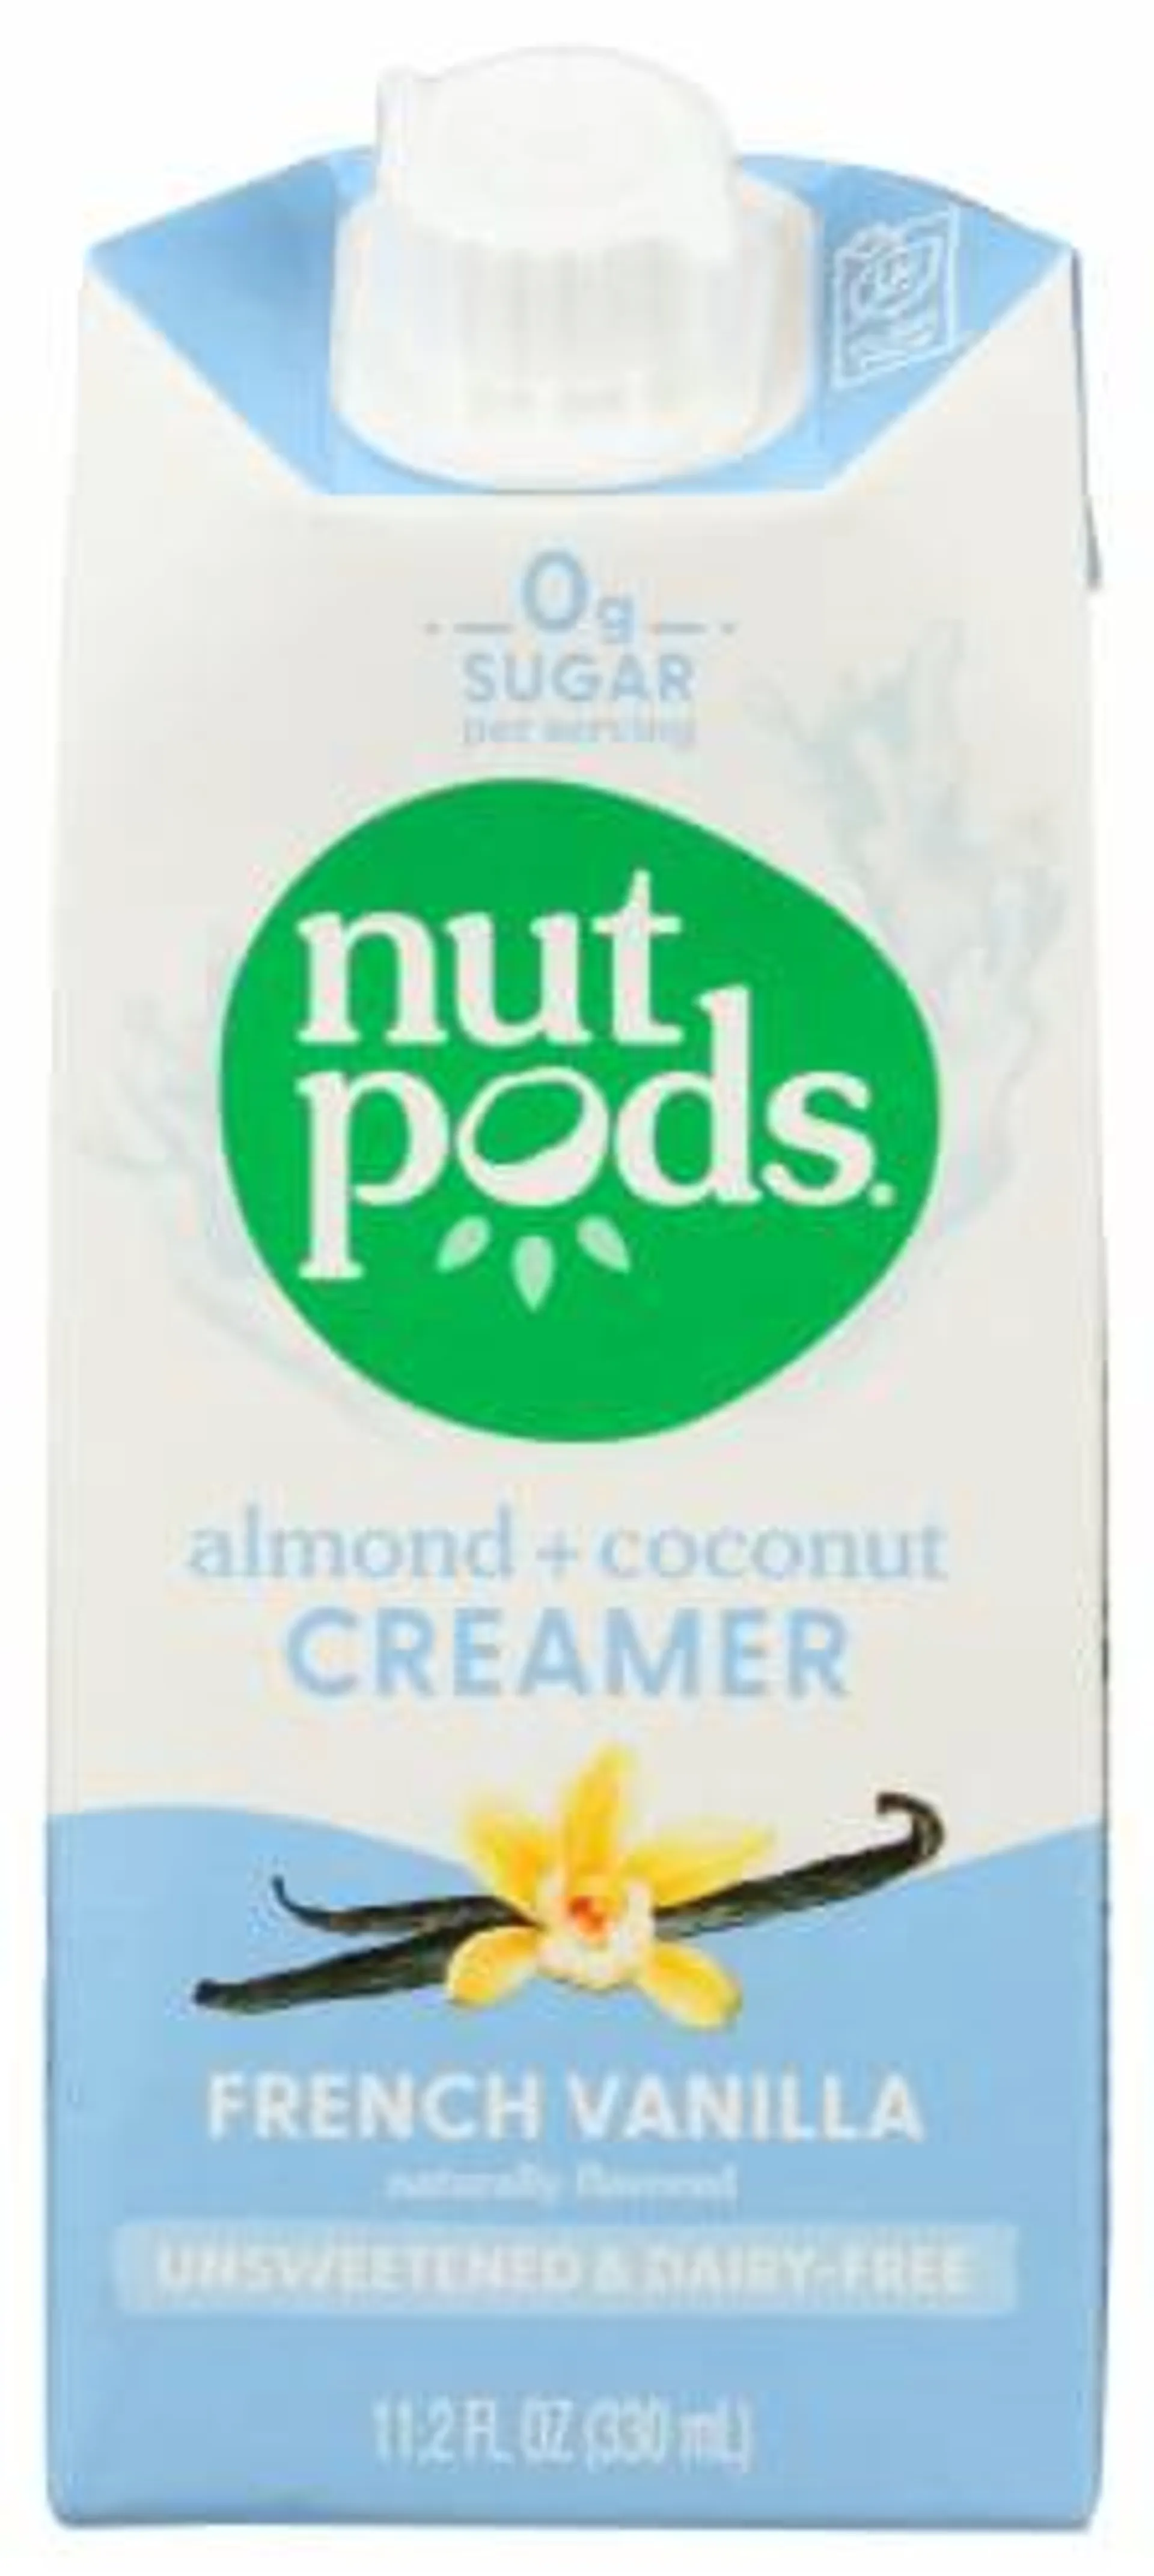 nutpods Dairy Free Unsweetened French Vanilla Almond + Coconut Creamer